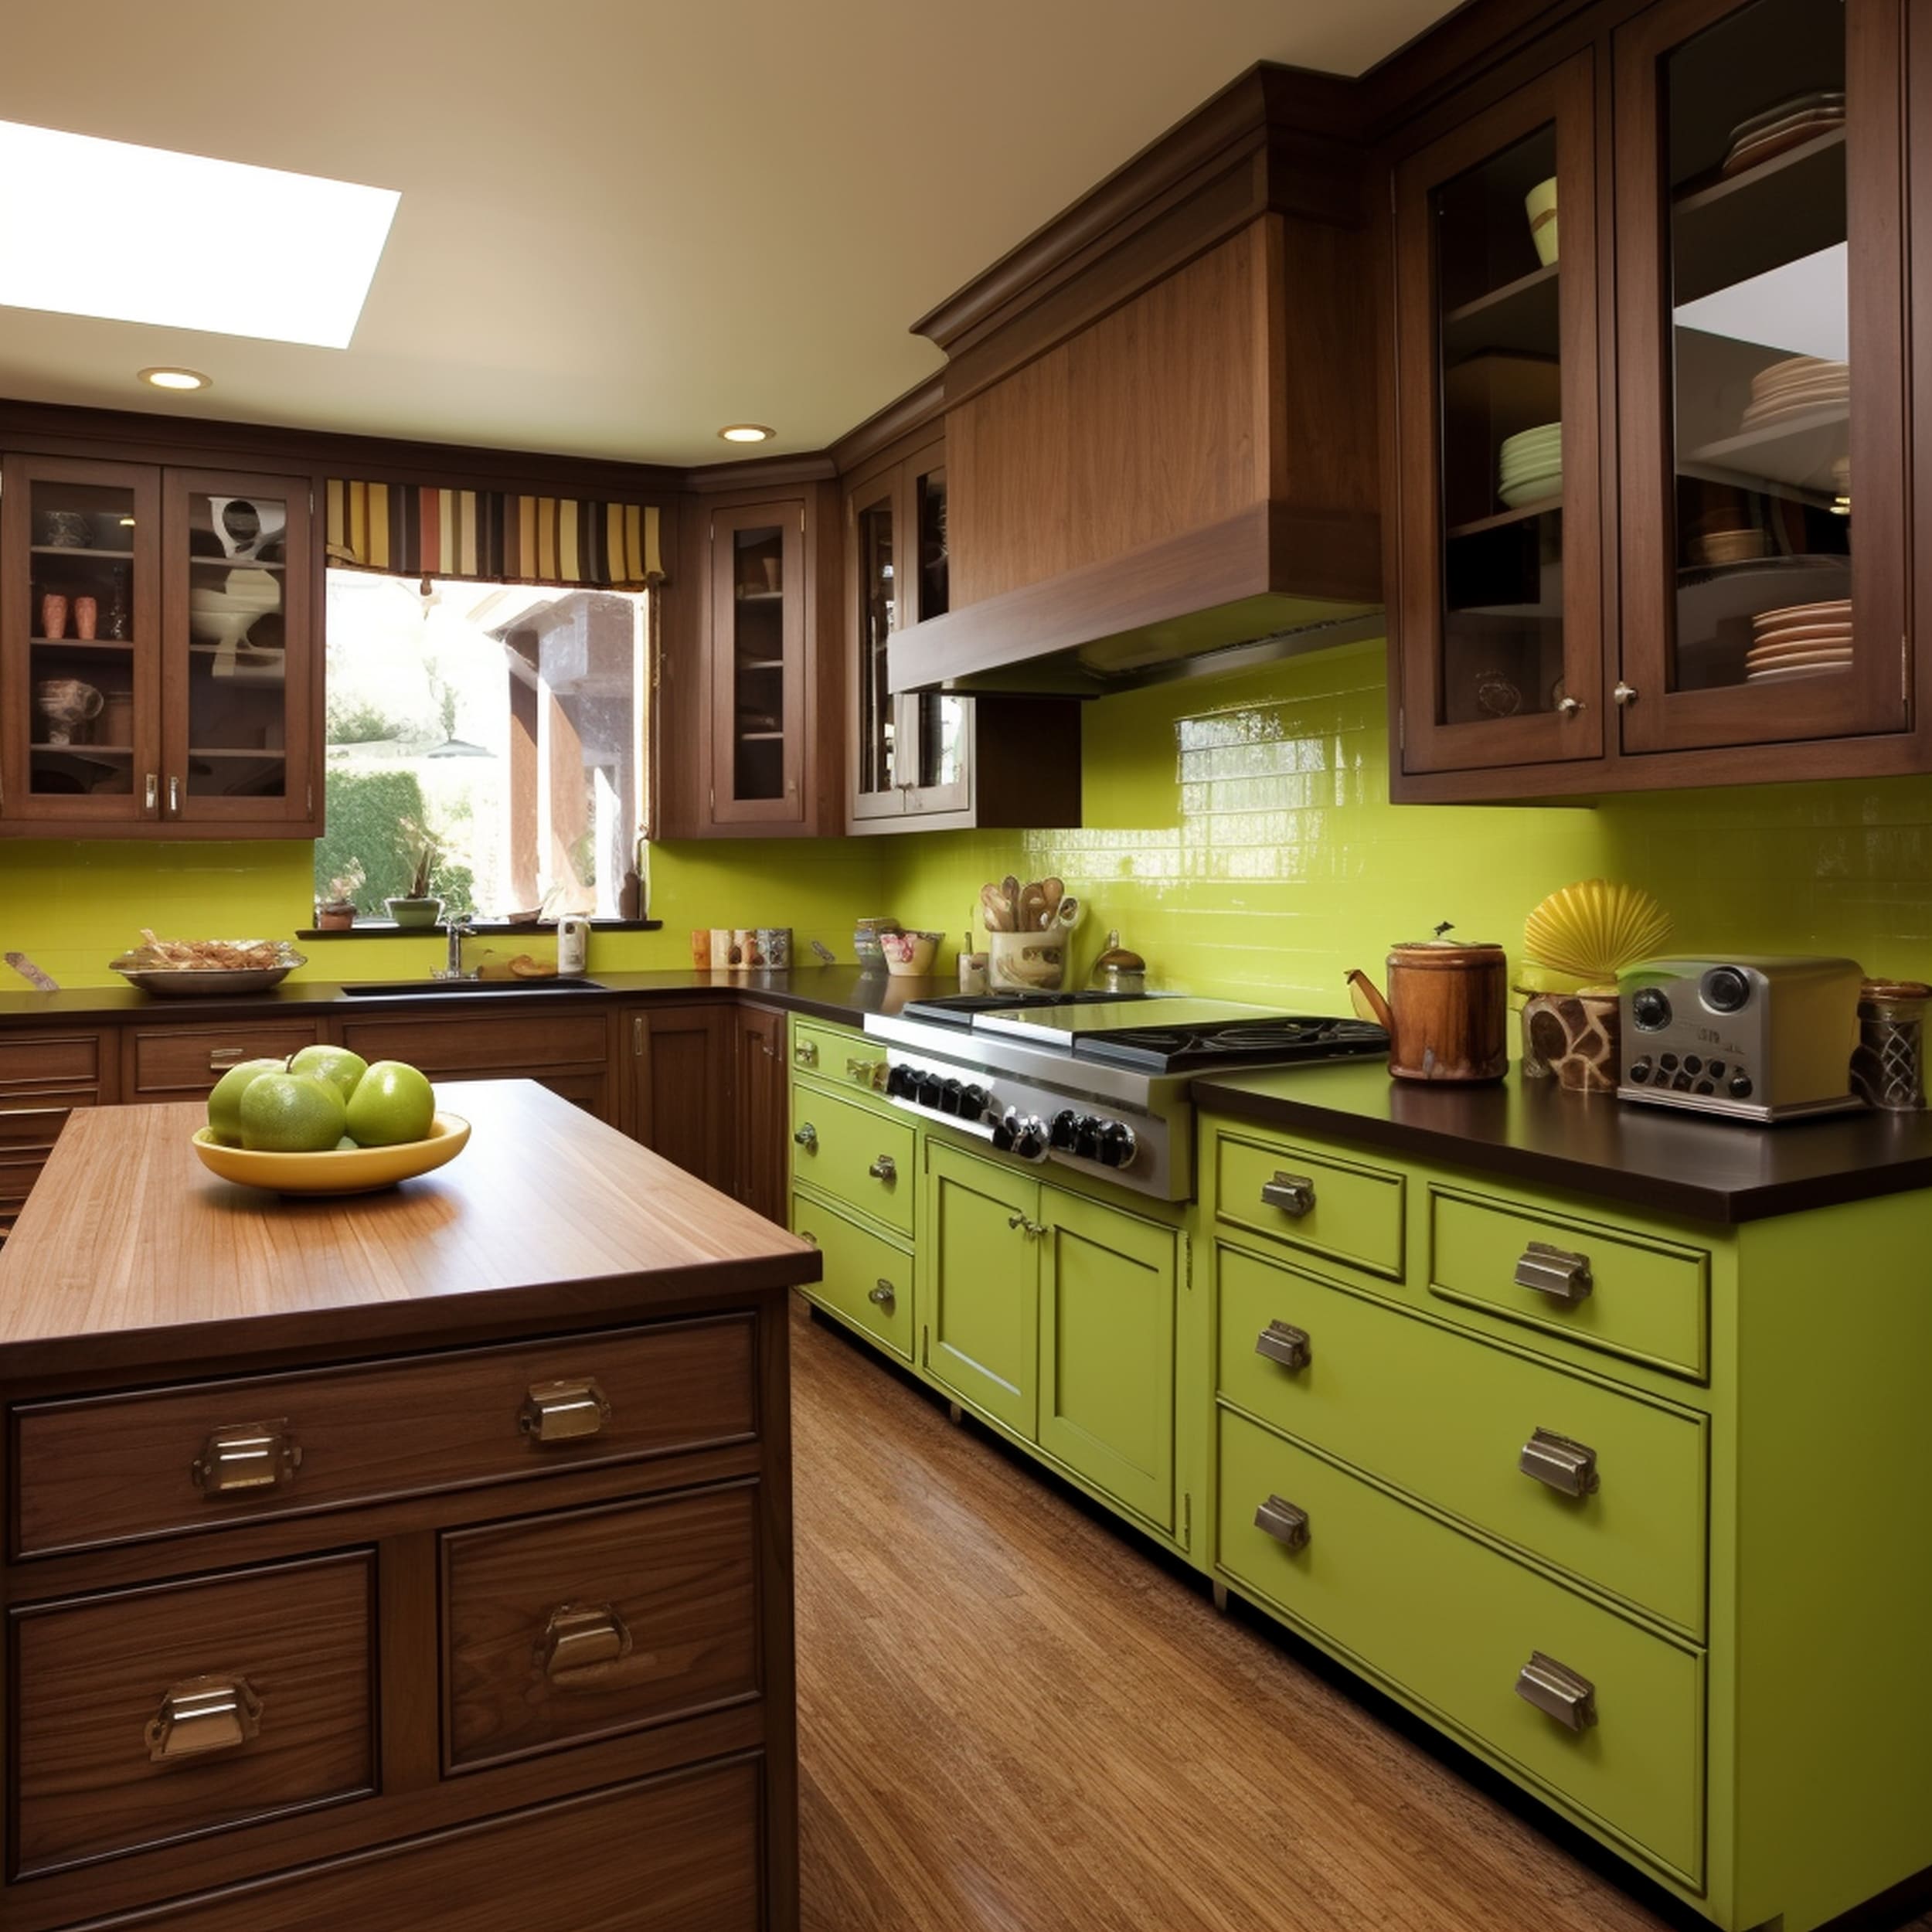 Kitchen With Mix of Lime Green and Brown Cabinets